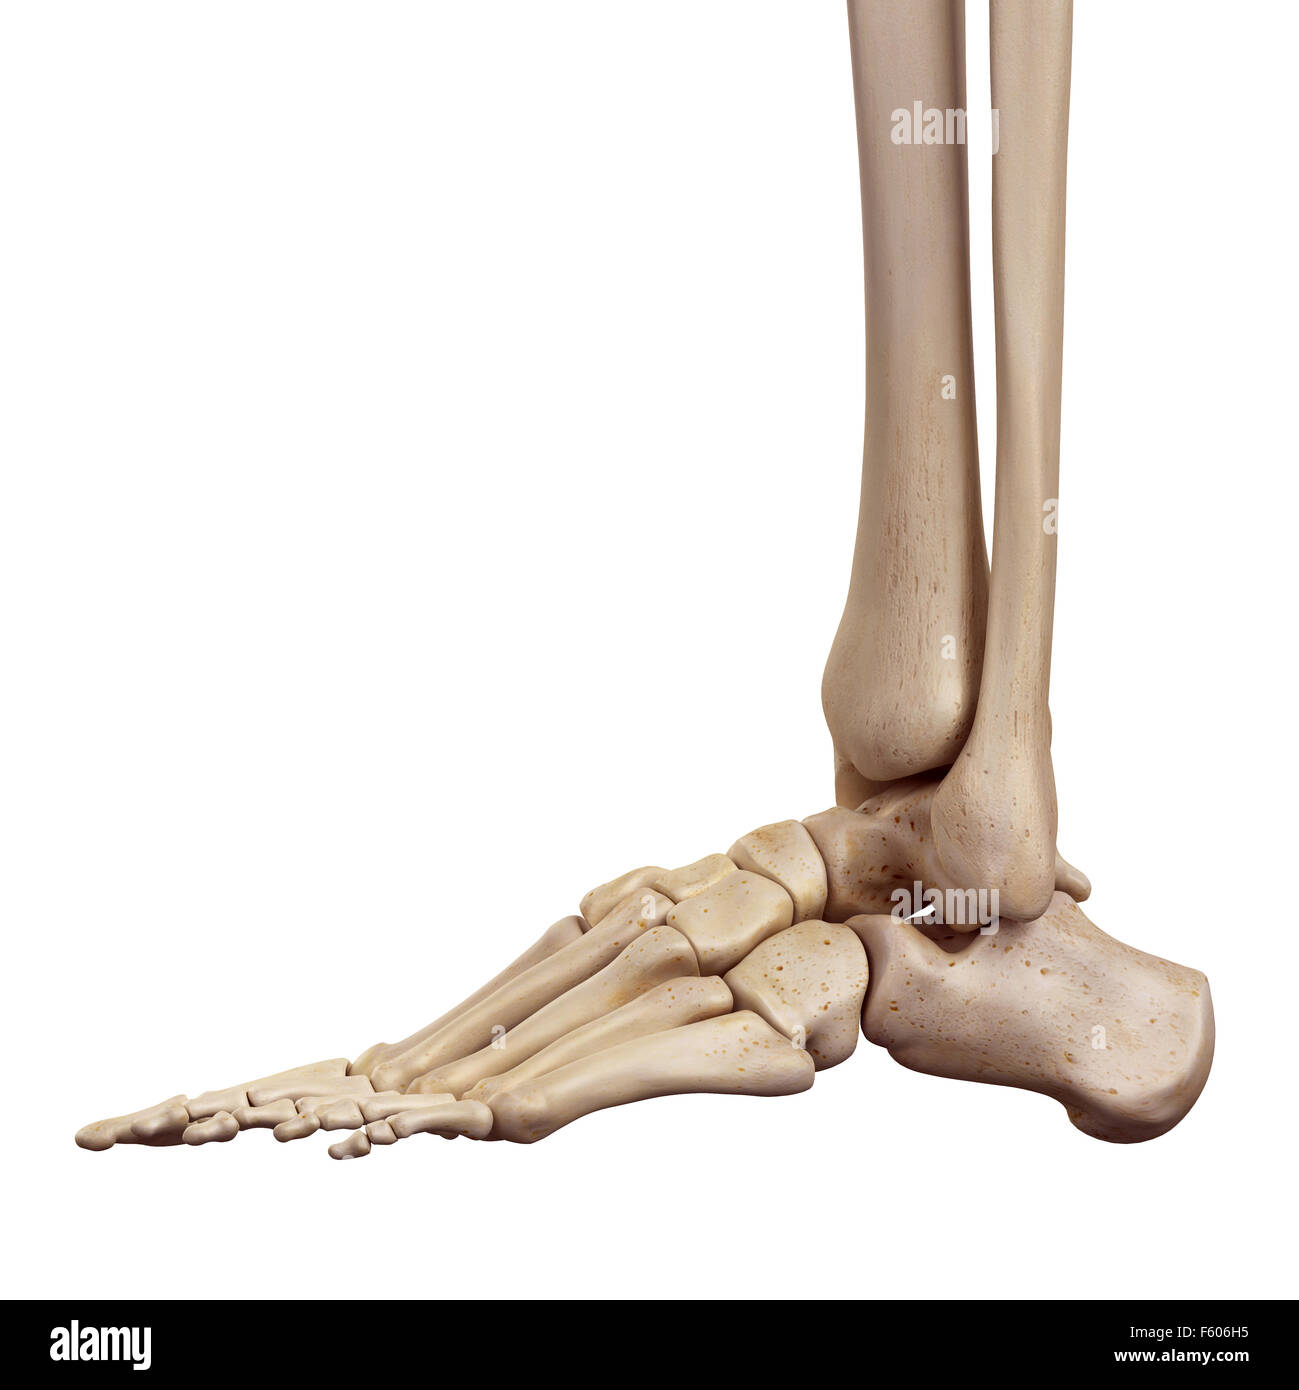 medical accurate illustration of the foot bones Stock Photo